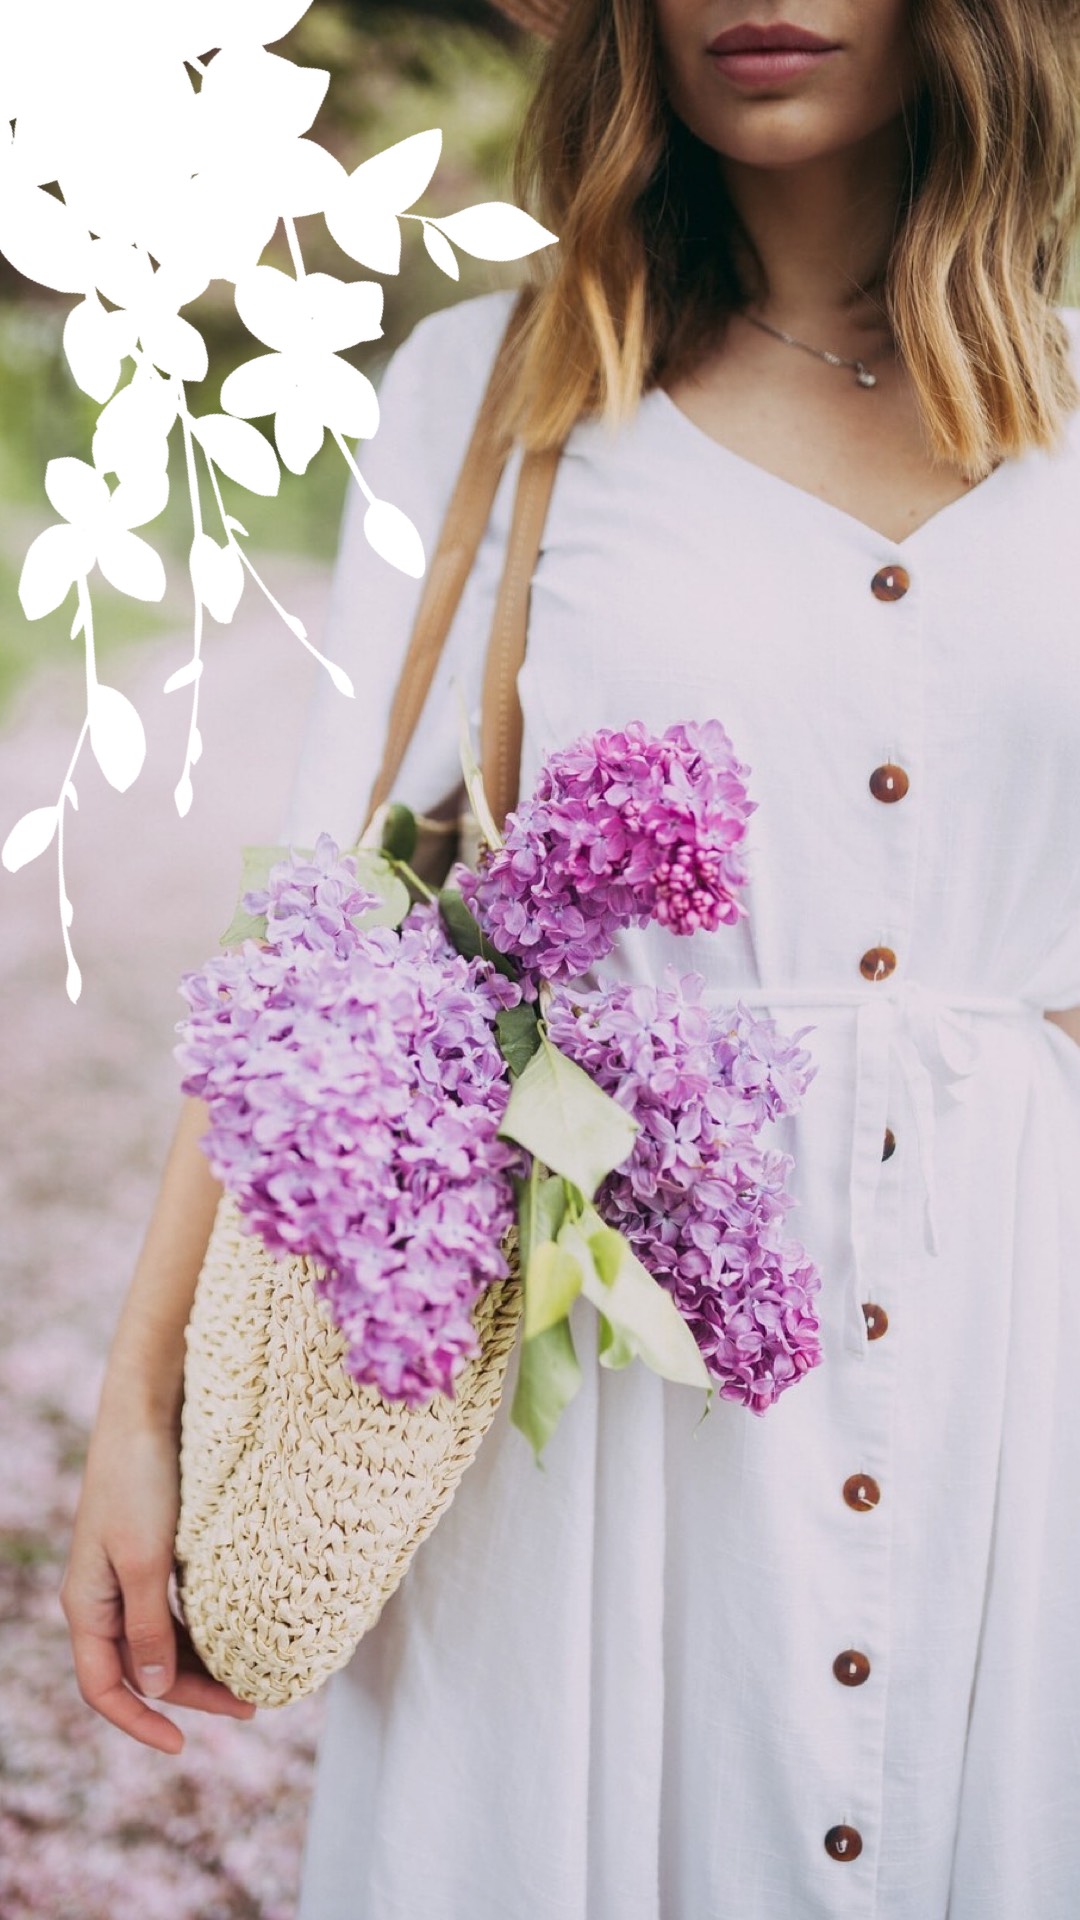 A Woman Wearing A Hat Holding A Basket Of Flowers Spring Story Template